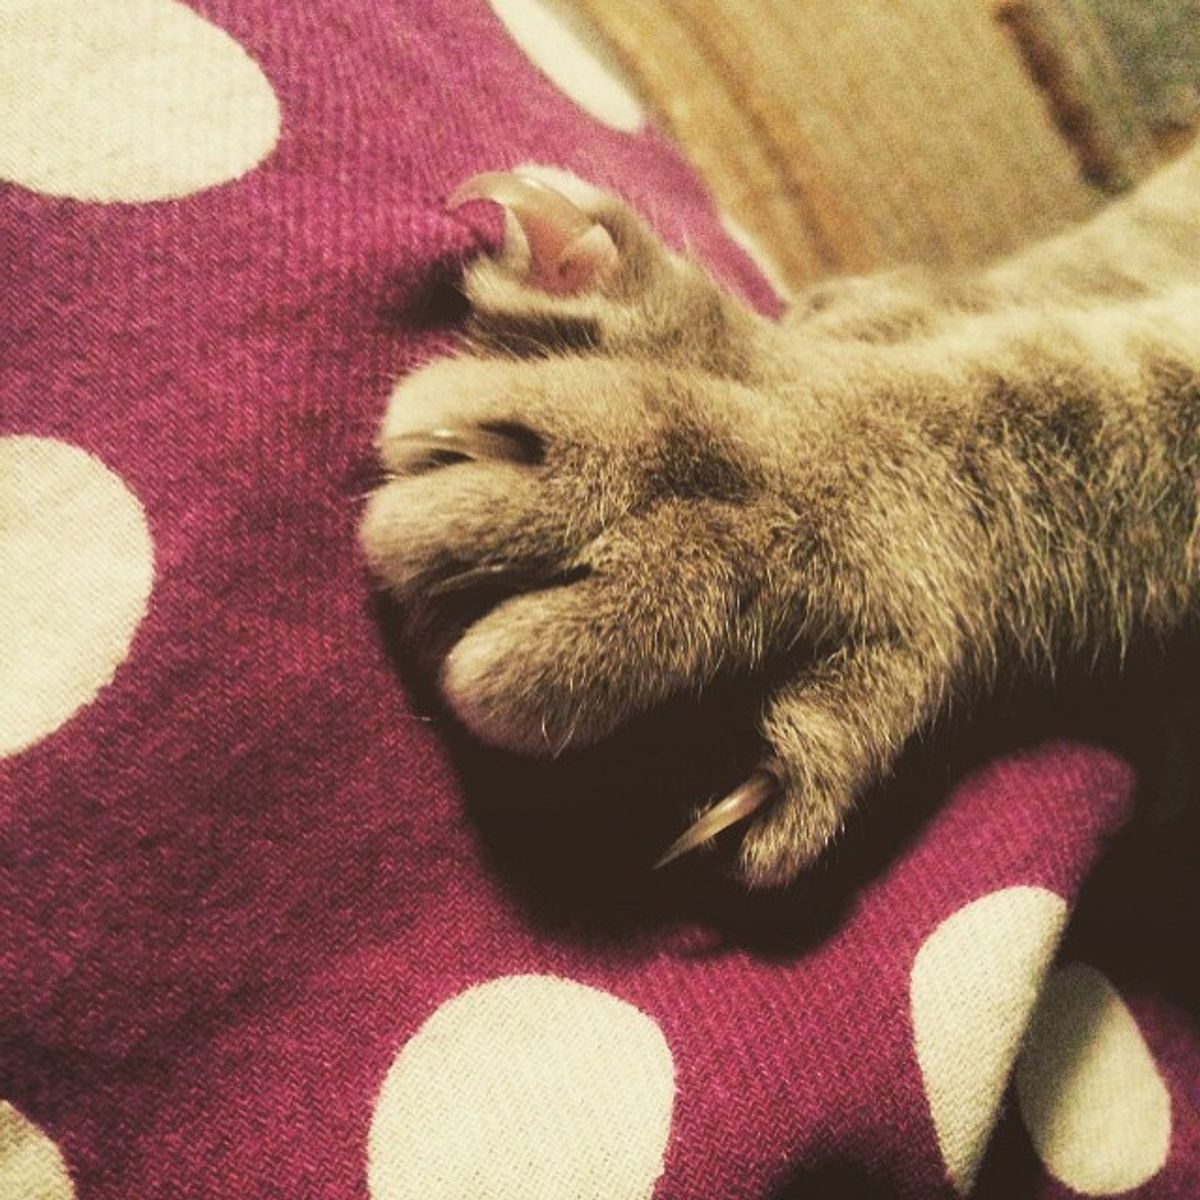 Why You Should Not Declaw Your Cat